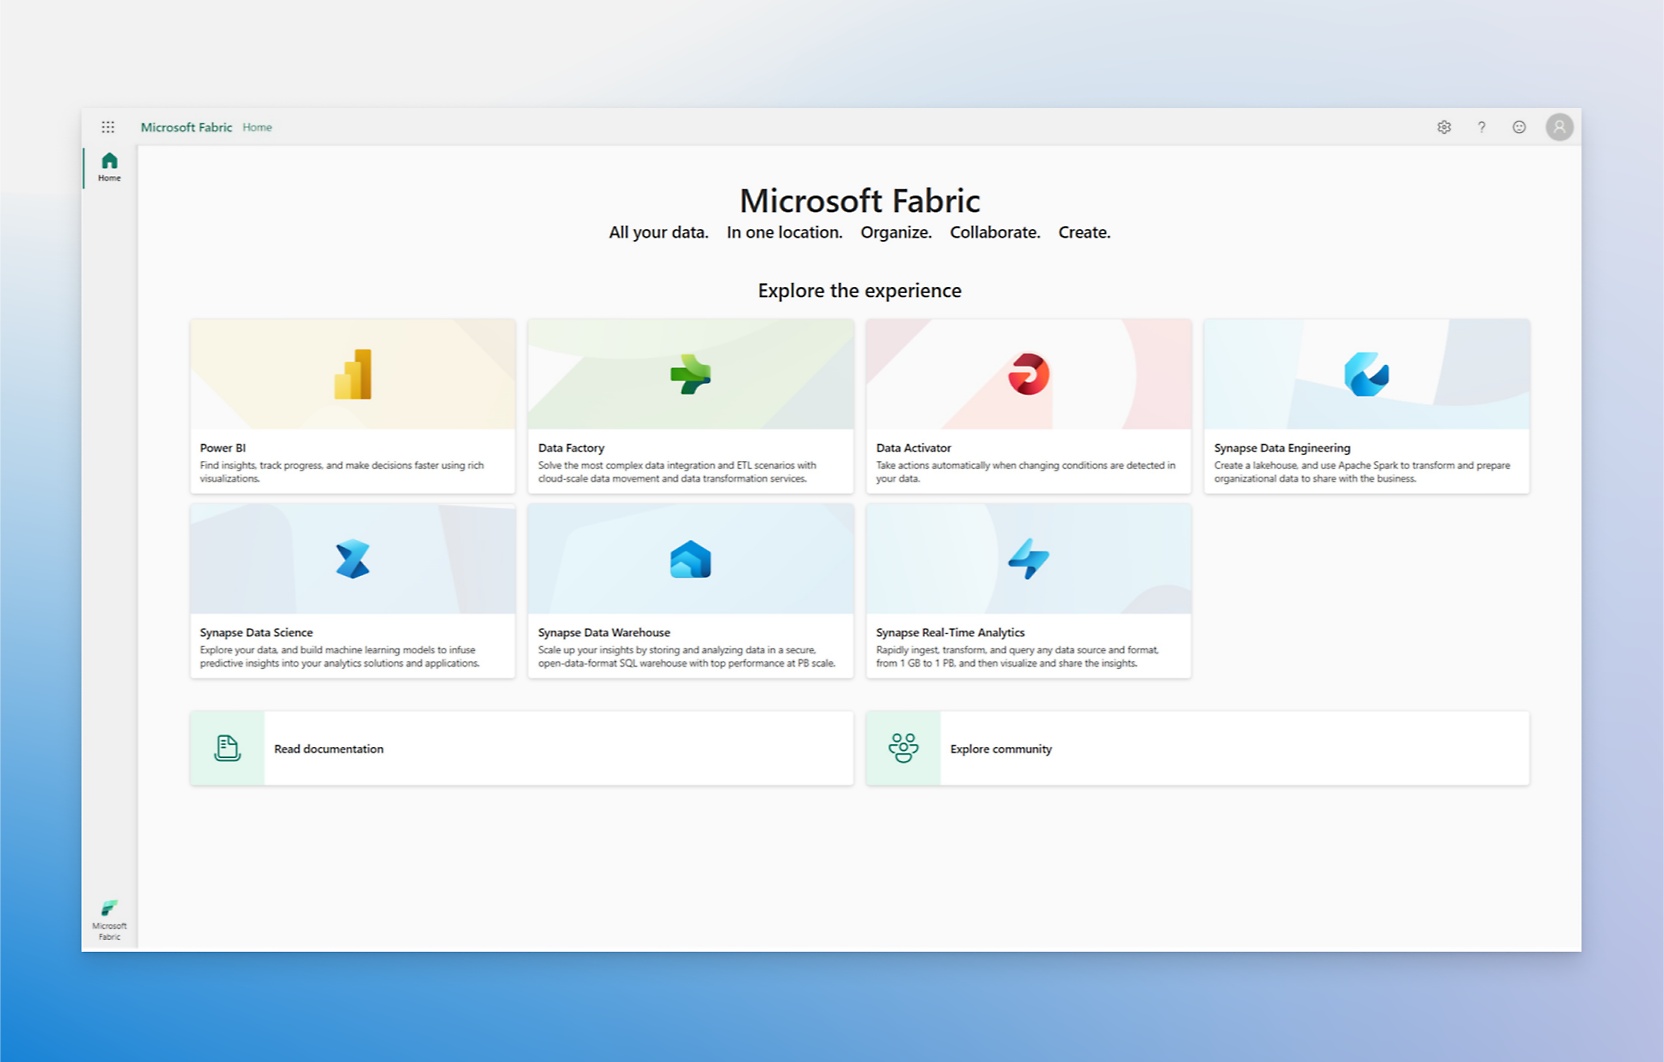 Microsoft Fabric landing page showing various options